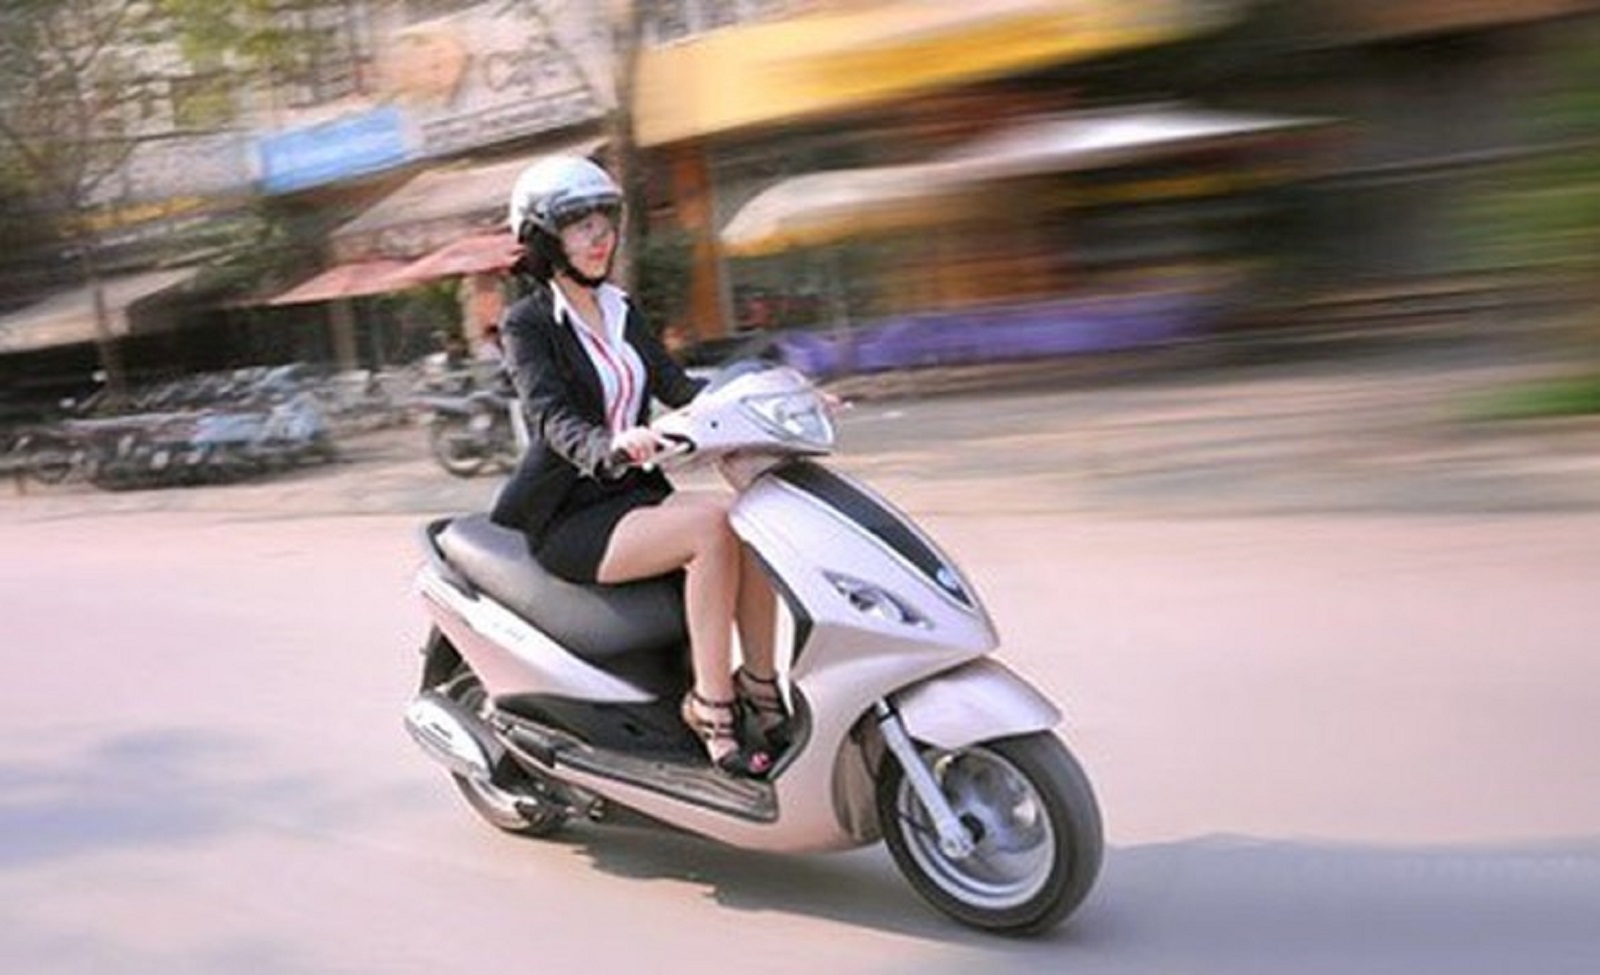 Women's bad habits cause scooters to break down quickly - Photo 3.